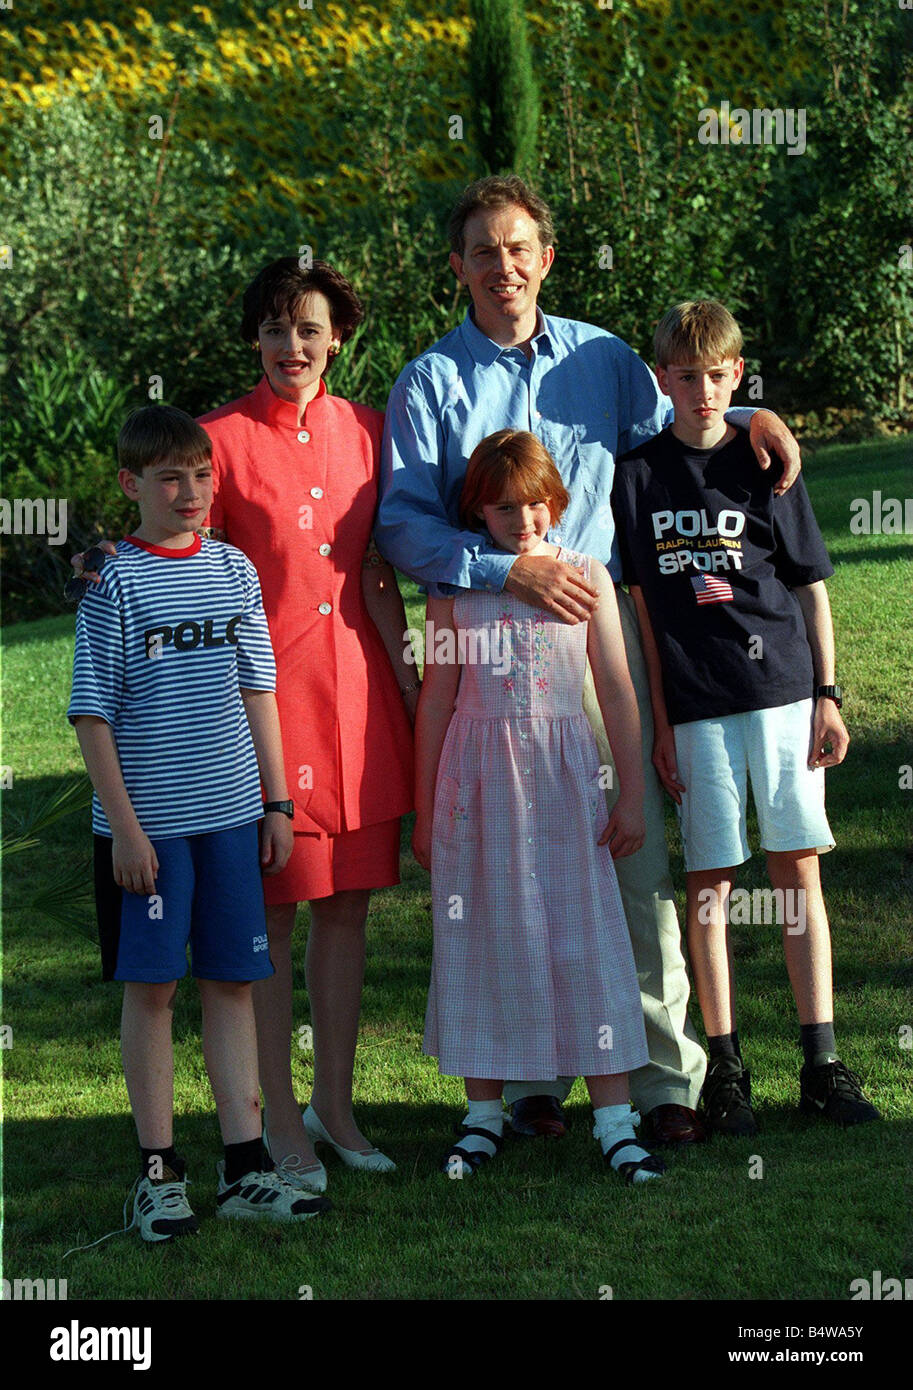 Tony Blair Prime Minister with family in Tuscany 1997 His wife Cherie Blair daughter Kathryn Blair and sons Euan Blair and Nicky Blair on holiday LAFRSSAPR05 0604 Stock Photo